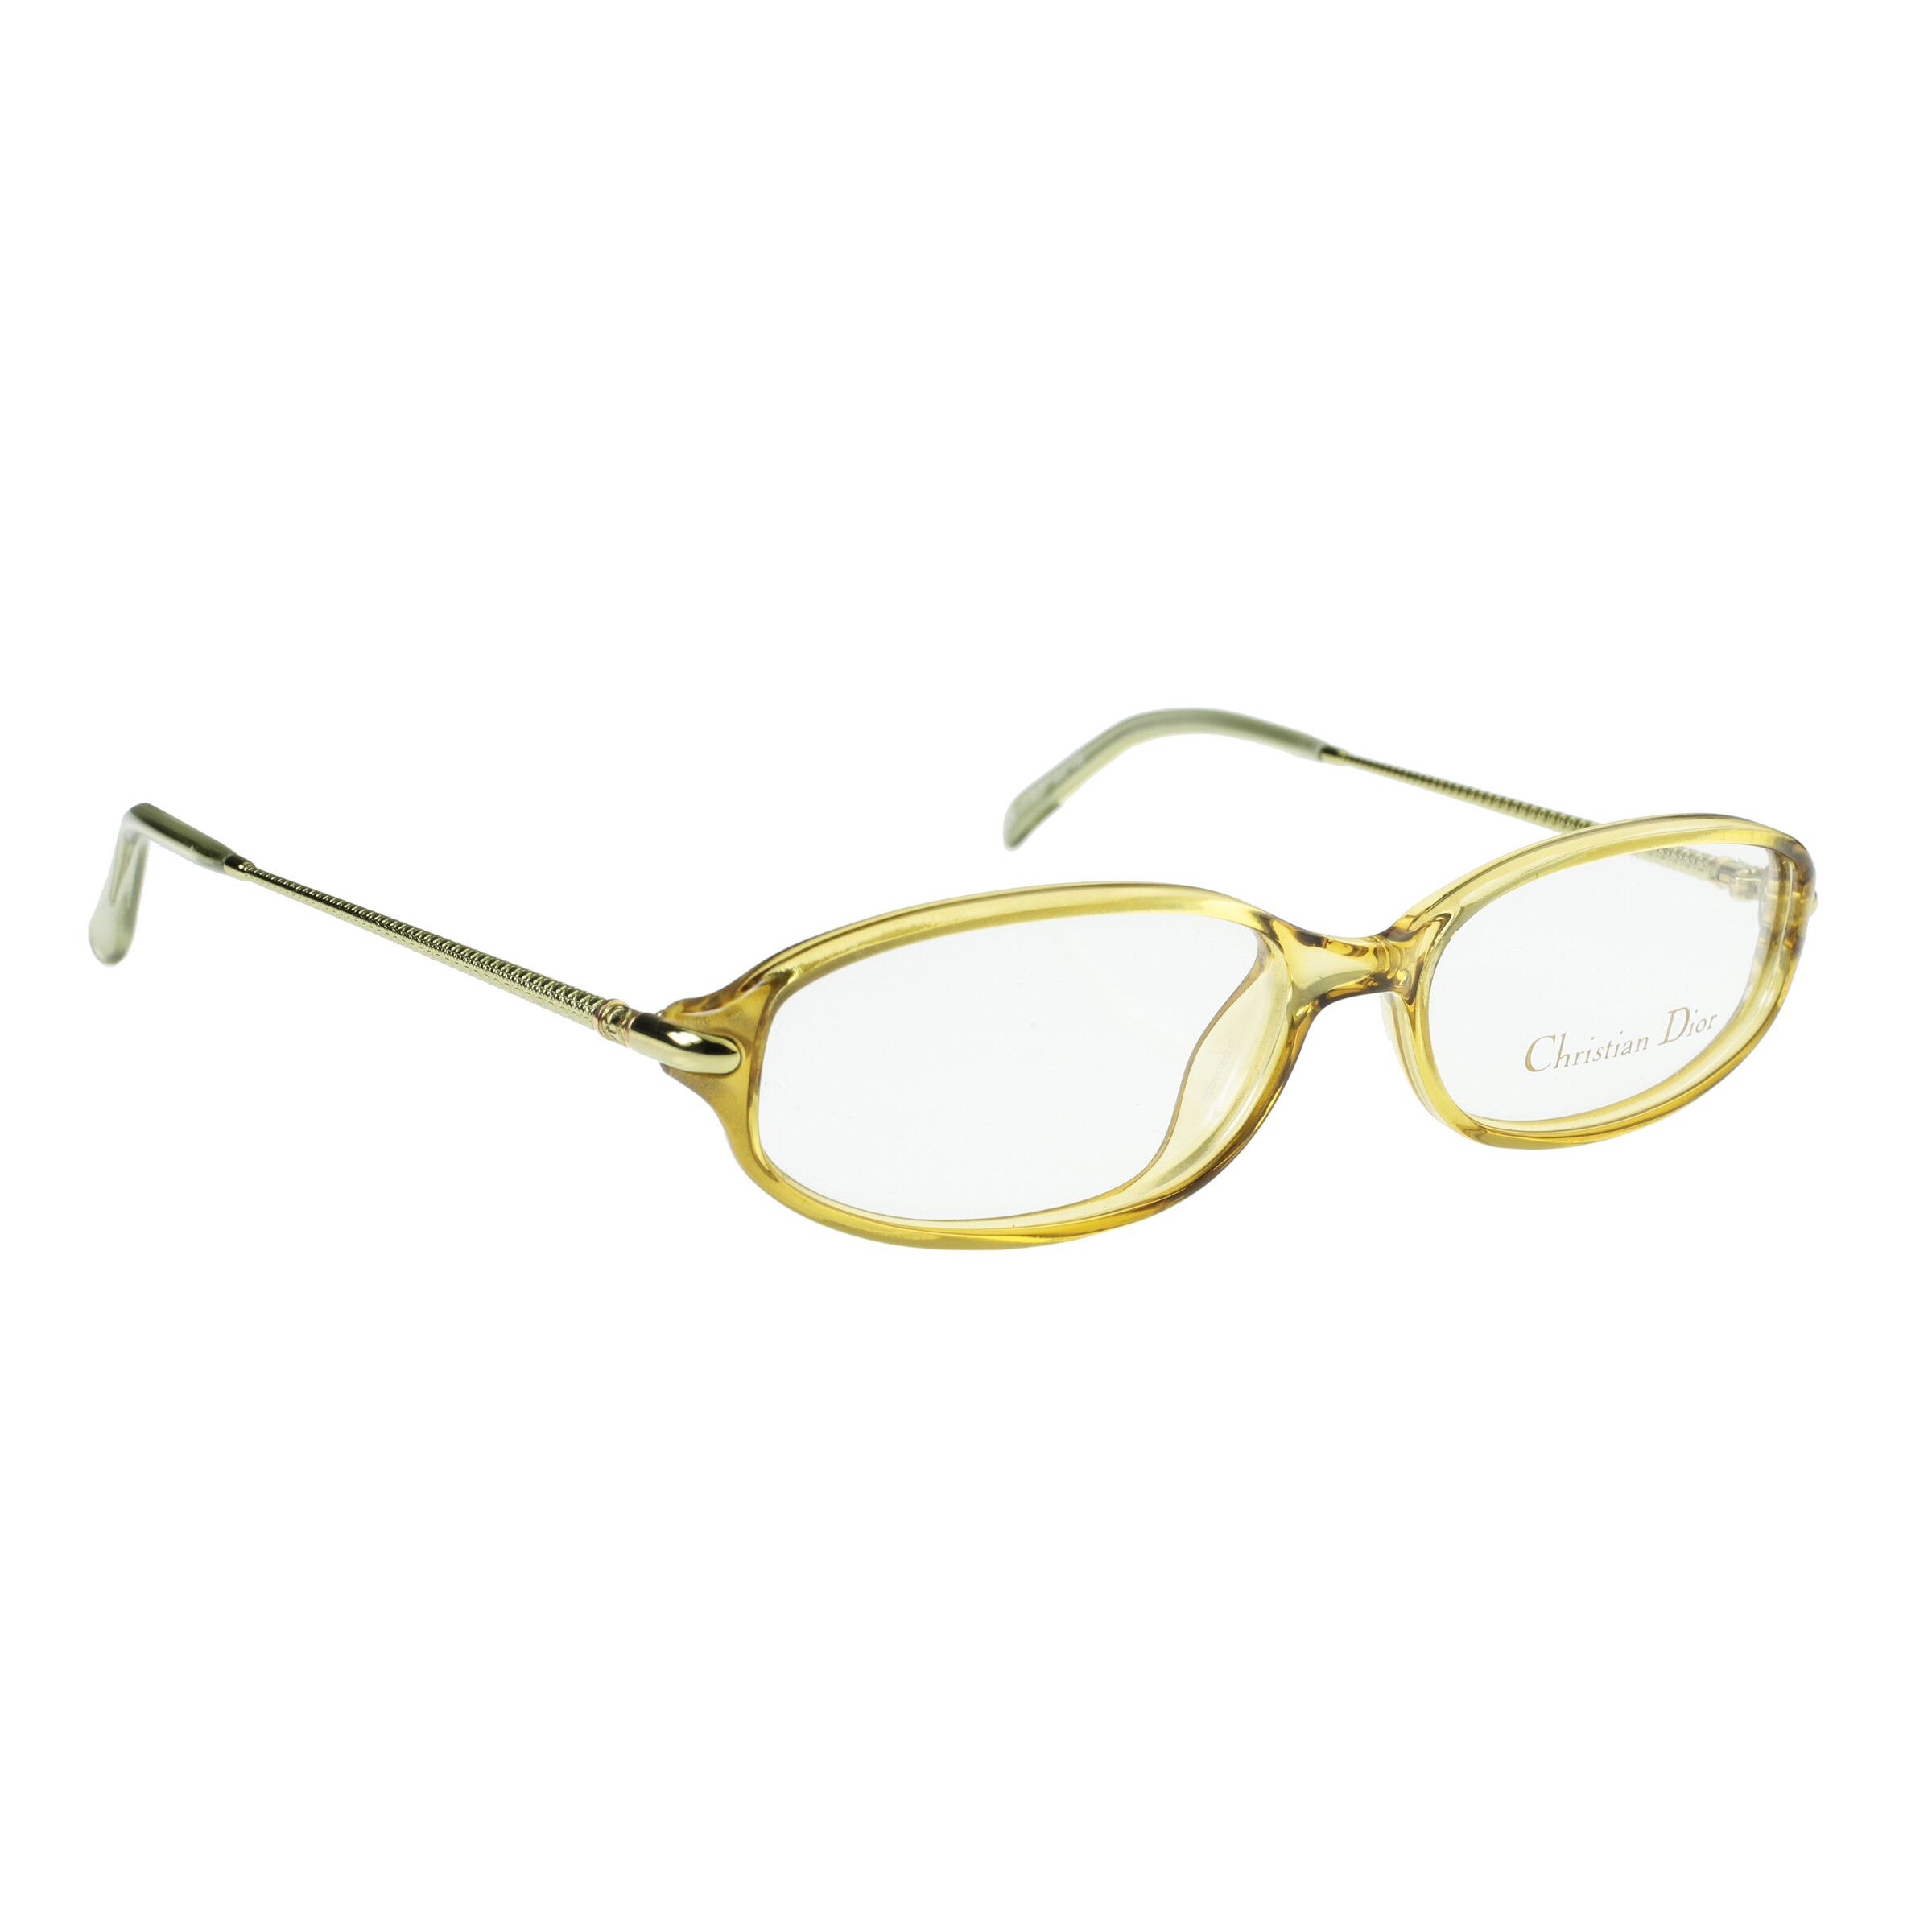 Pre-owned Archival Clothing X Dior Christian Dior '90s Green Plastic Frame Glasses